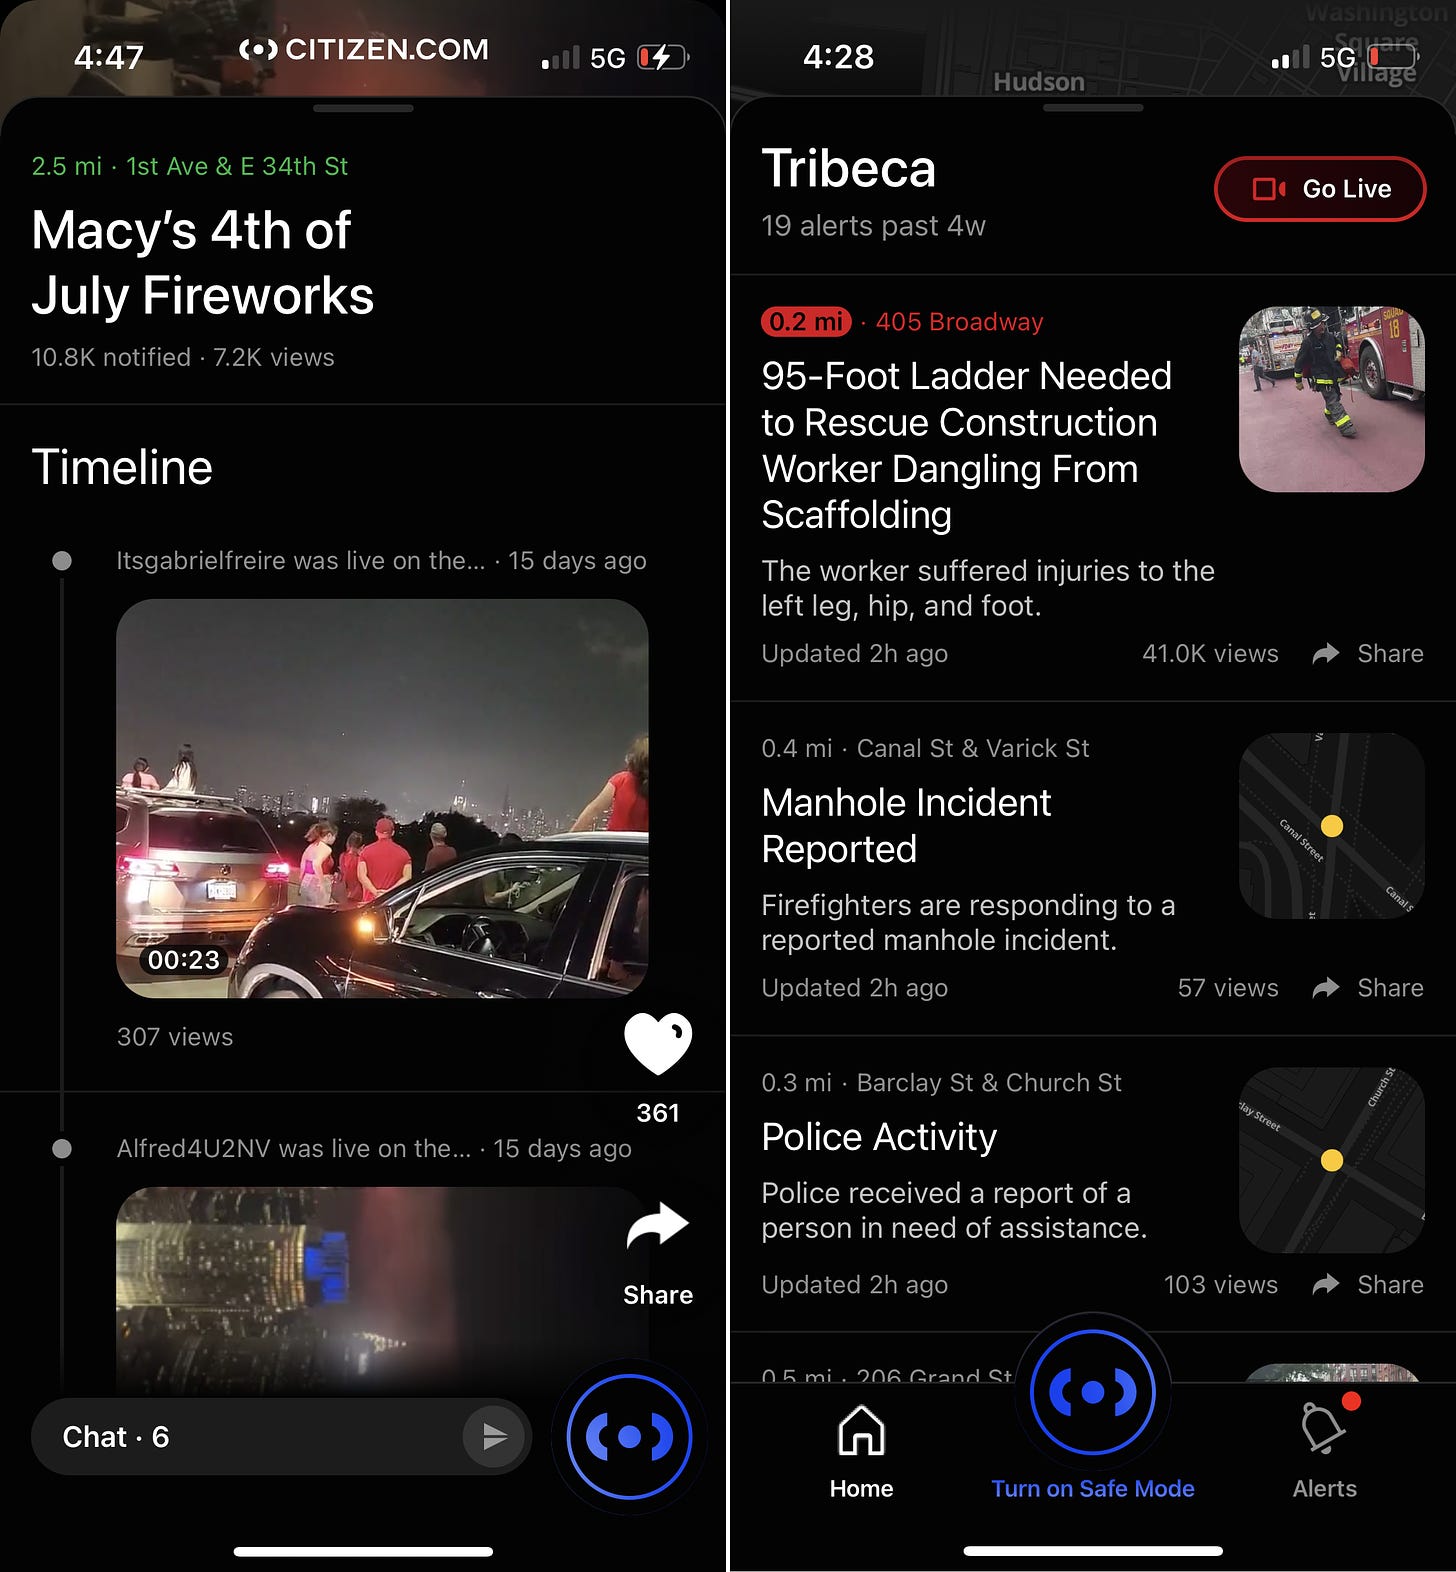 Two screenshots from the Citizen app. Left: an event "Macy's 4th of July Fireworks" and its associated timeline showing videos posted by users and 361 reactions. Right: a list of alerts in Tribeca showing firefighter and police activity in the last 2 hours.